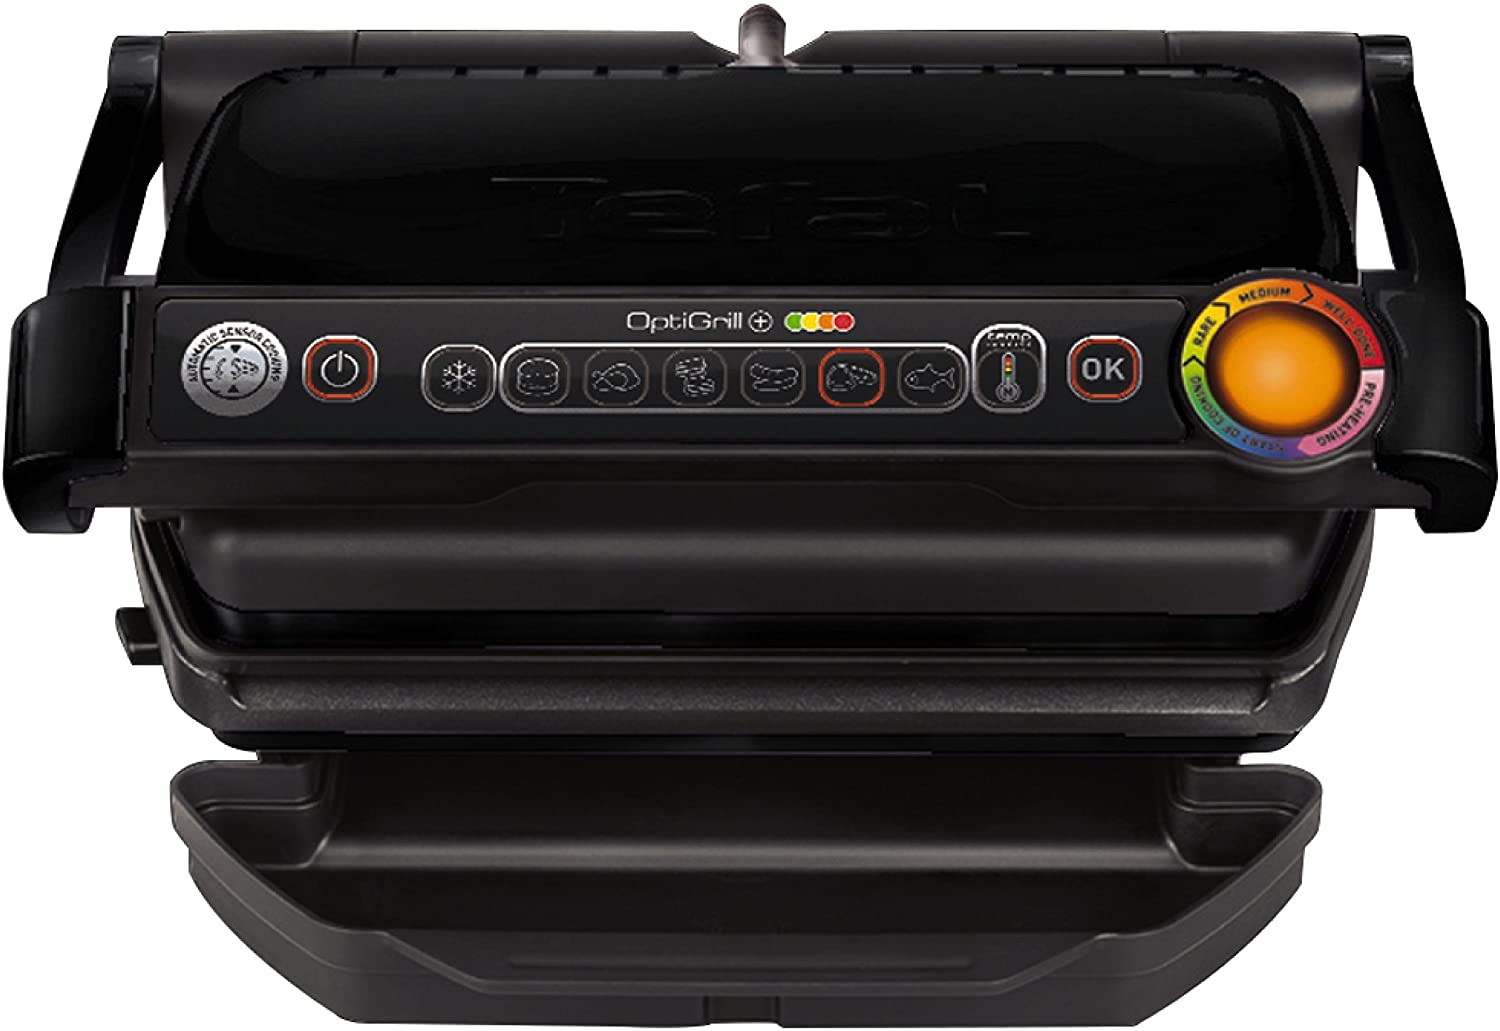 Tefal OptiGrill XL GC722D contact grill (with XL grill surface, plus model with additional temperature settings, 2,000 watts, automatic display of the cooking state, 9 pre-set programs) black / silver